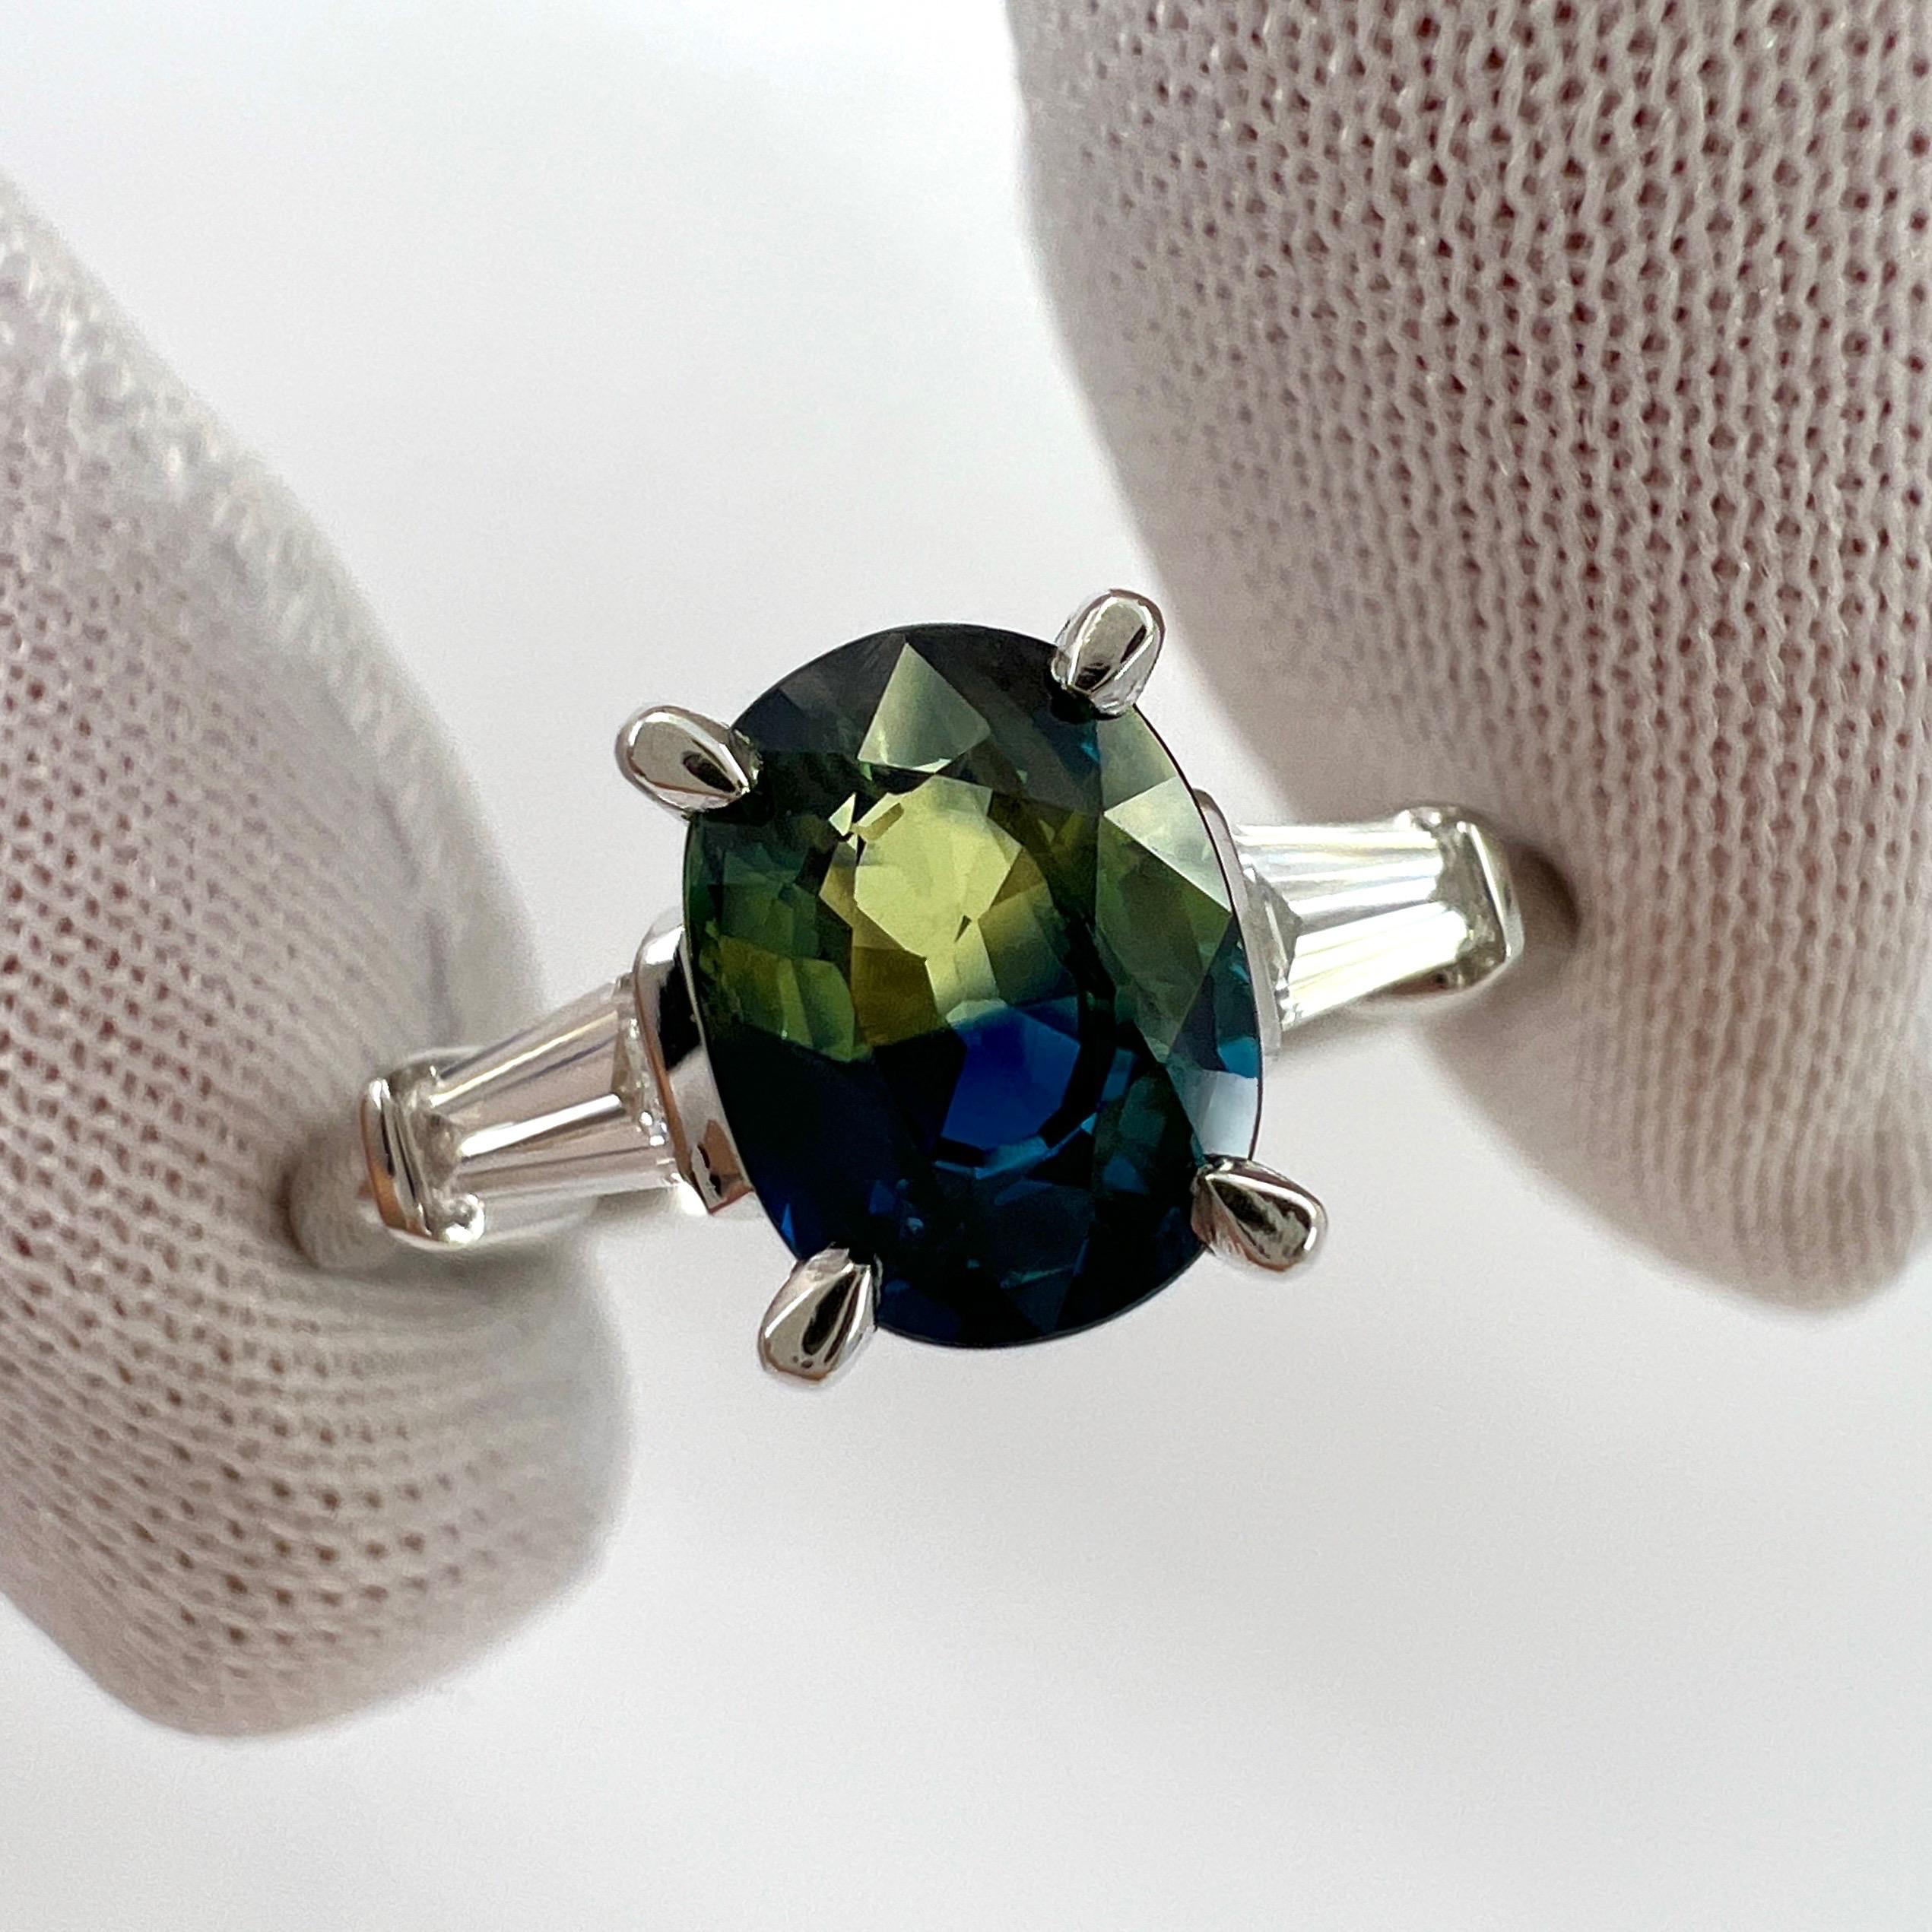 Natural Australian Bi Colour Sapphire & Diamond Platinum Three Stone Ring.

Rare GIA Certified 1.35 carat natural sapphire with a unique blue & yellow bi colour effect. Very rare and stunning to see, similarly seen in ametrine and watermelon